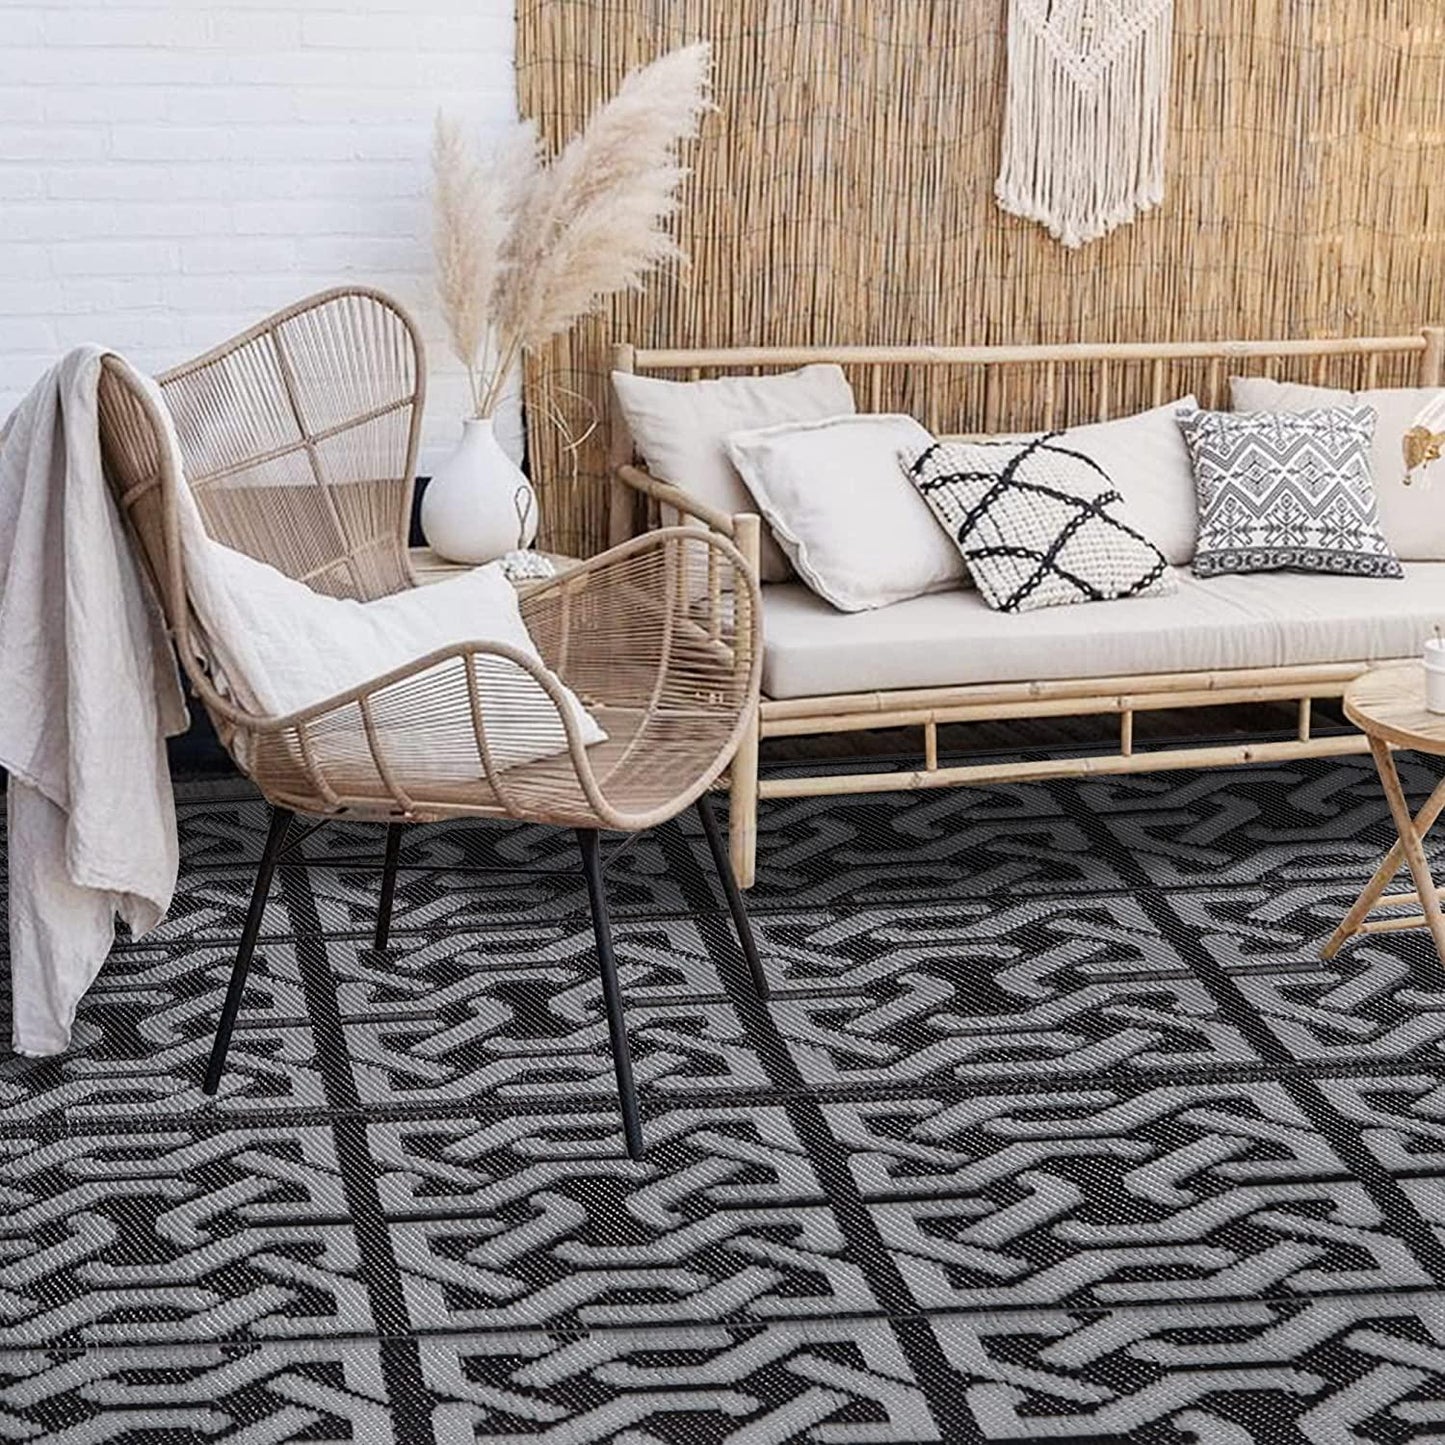 Reversible Mats, Plastic Straw Rug, Modern Area Rug, Large Floor Mat and Rug for Outdoors,Beach, Trailer, Camping  Black and Grey)